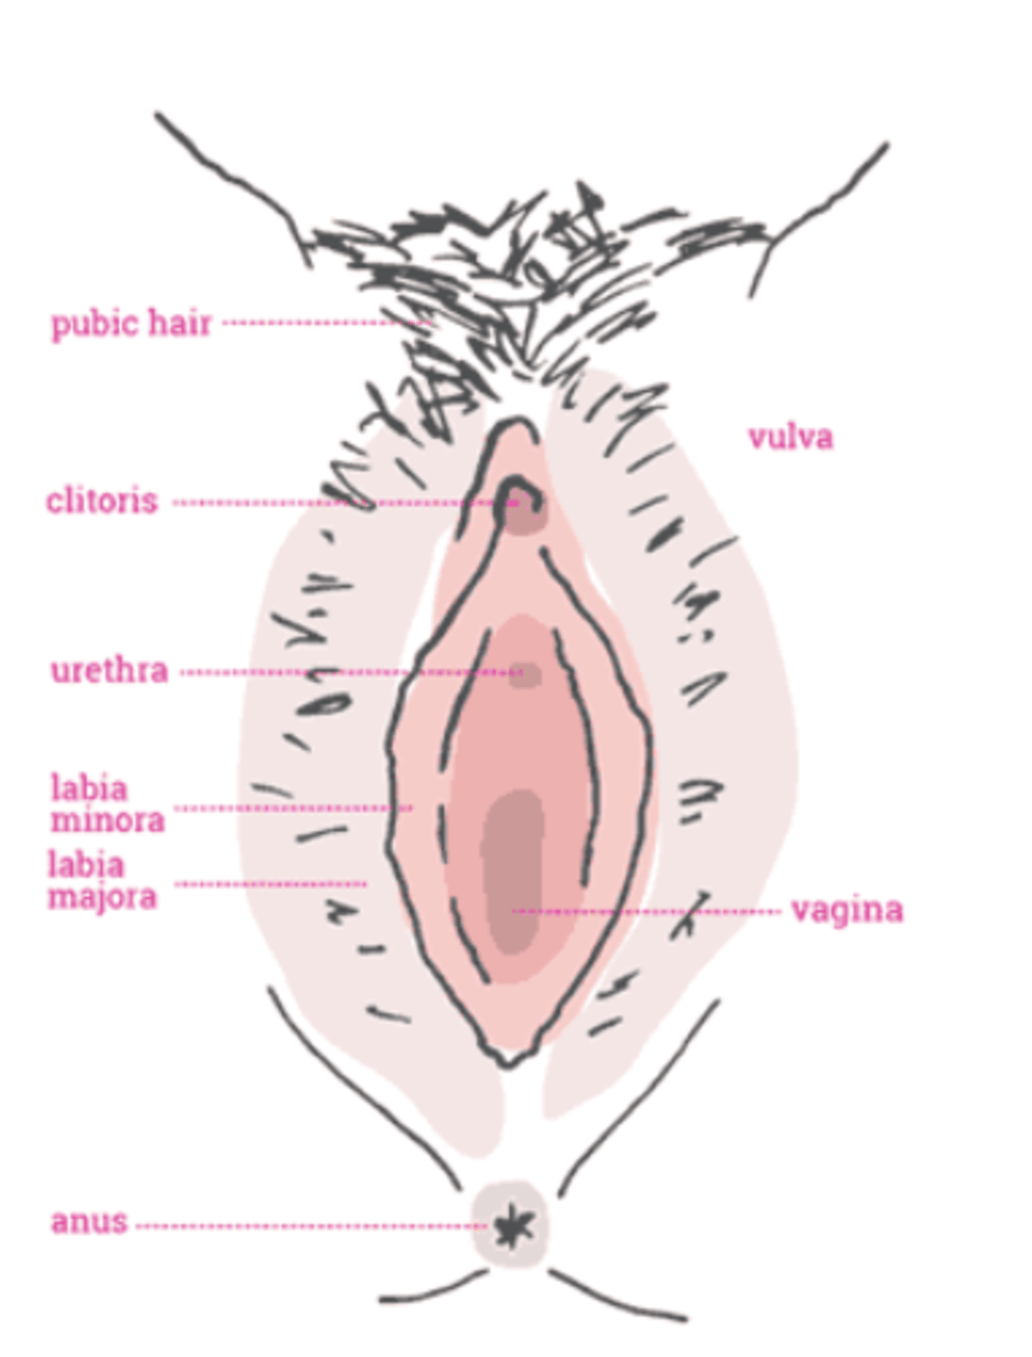 Ladies, We Need To Talk About Your Vaginas